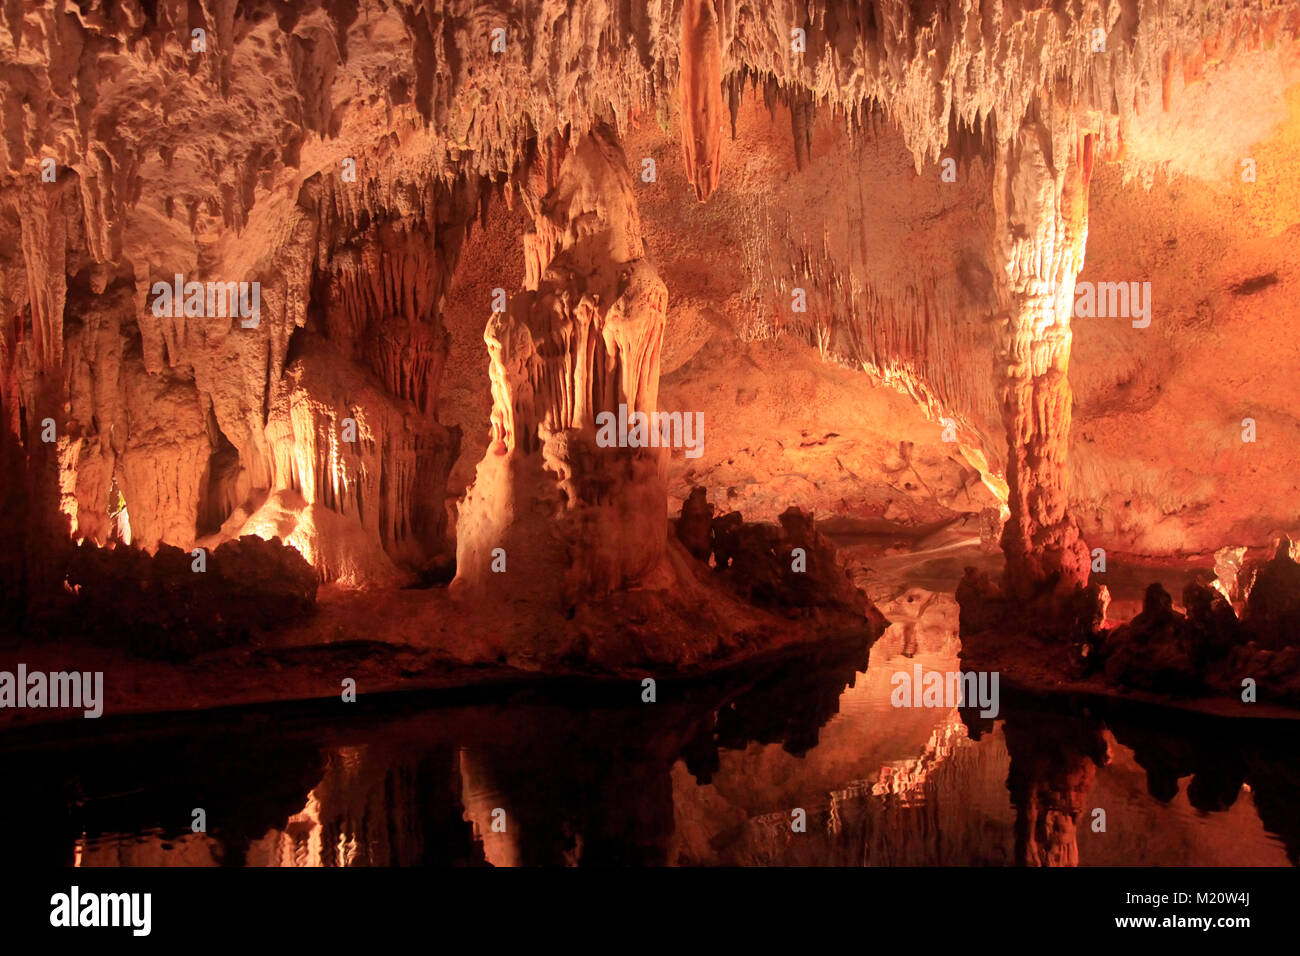 Cueva de las Maravillas. Cave of Wonders - one of the main natural attractions of the Dominican Republic, preserved in its original form Stock Photo